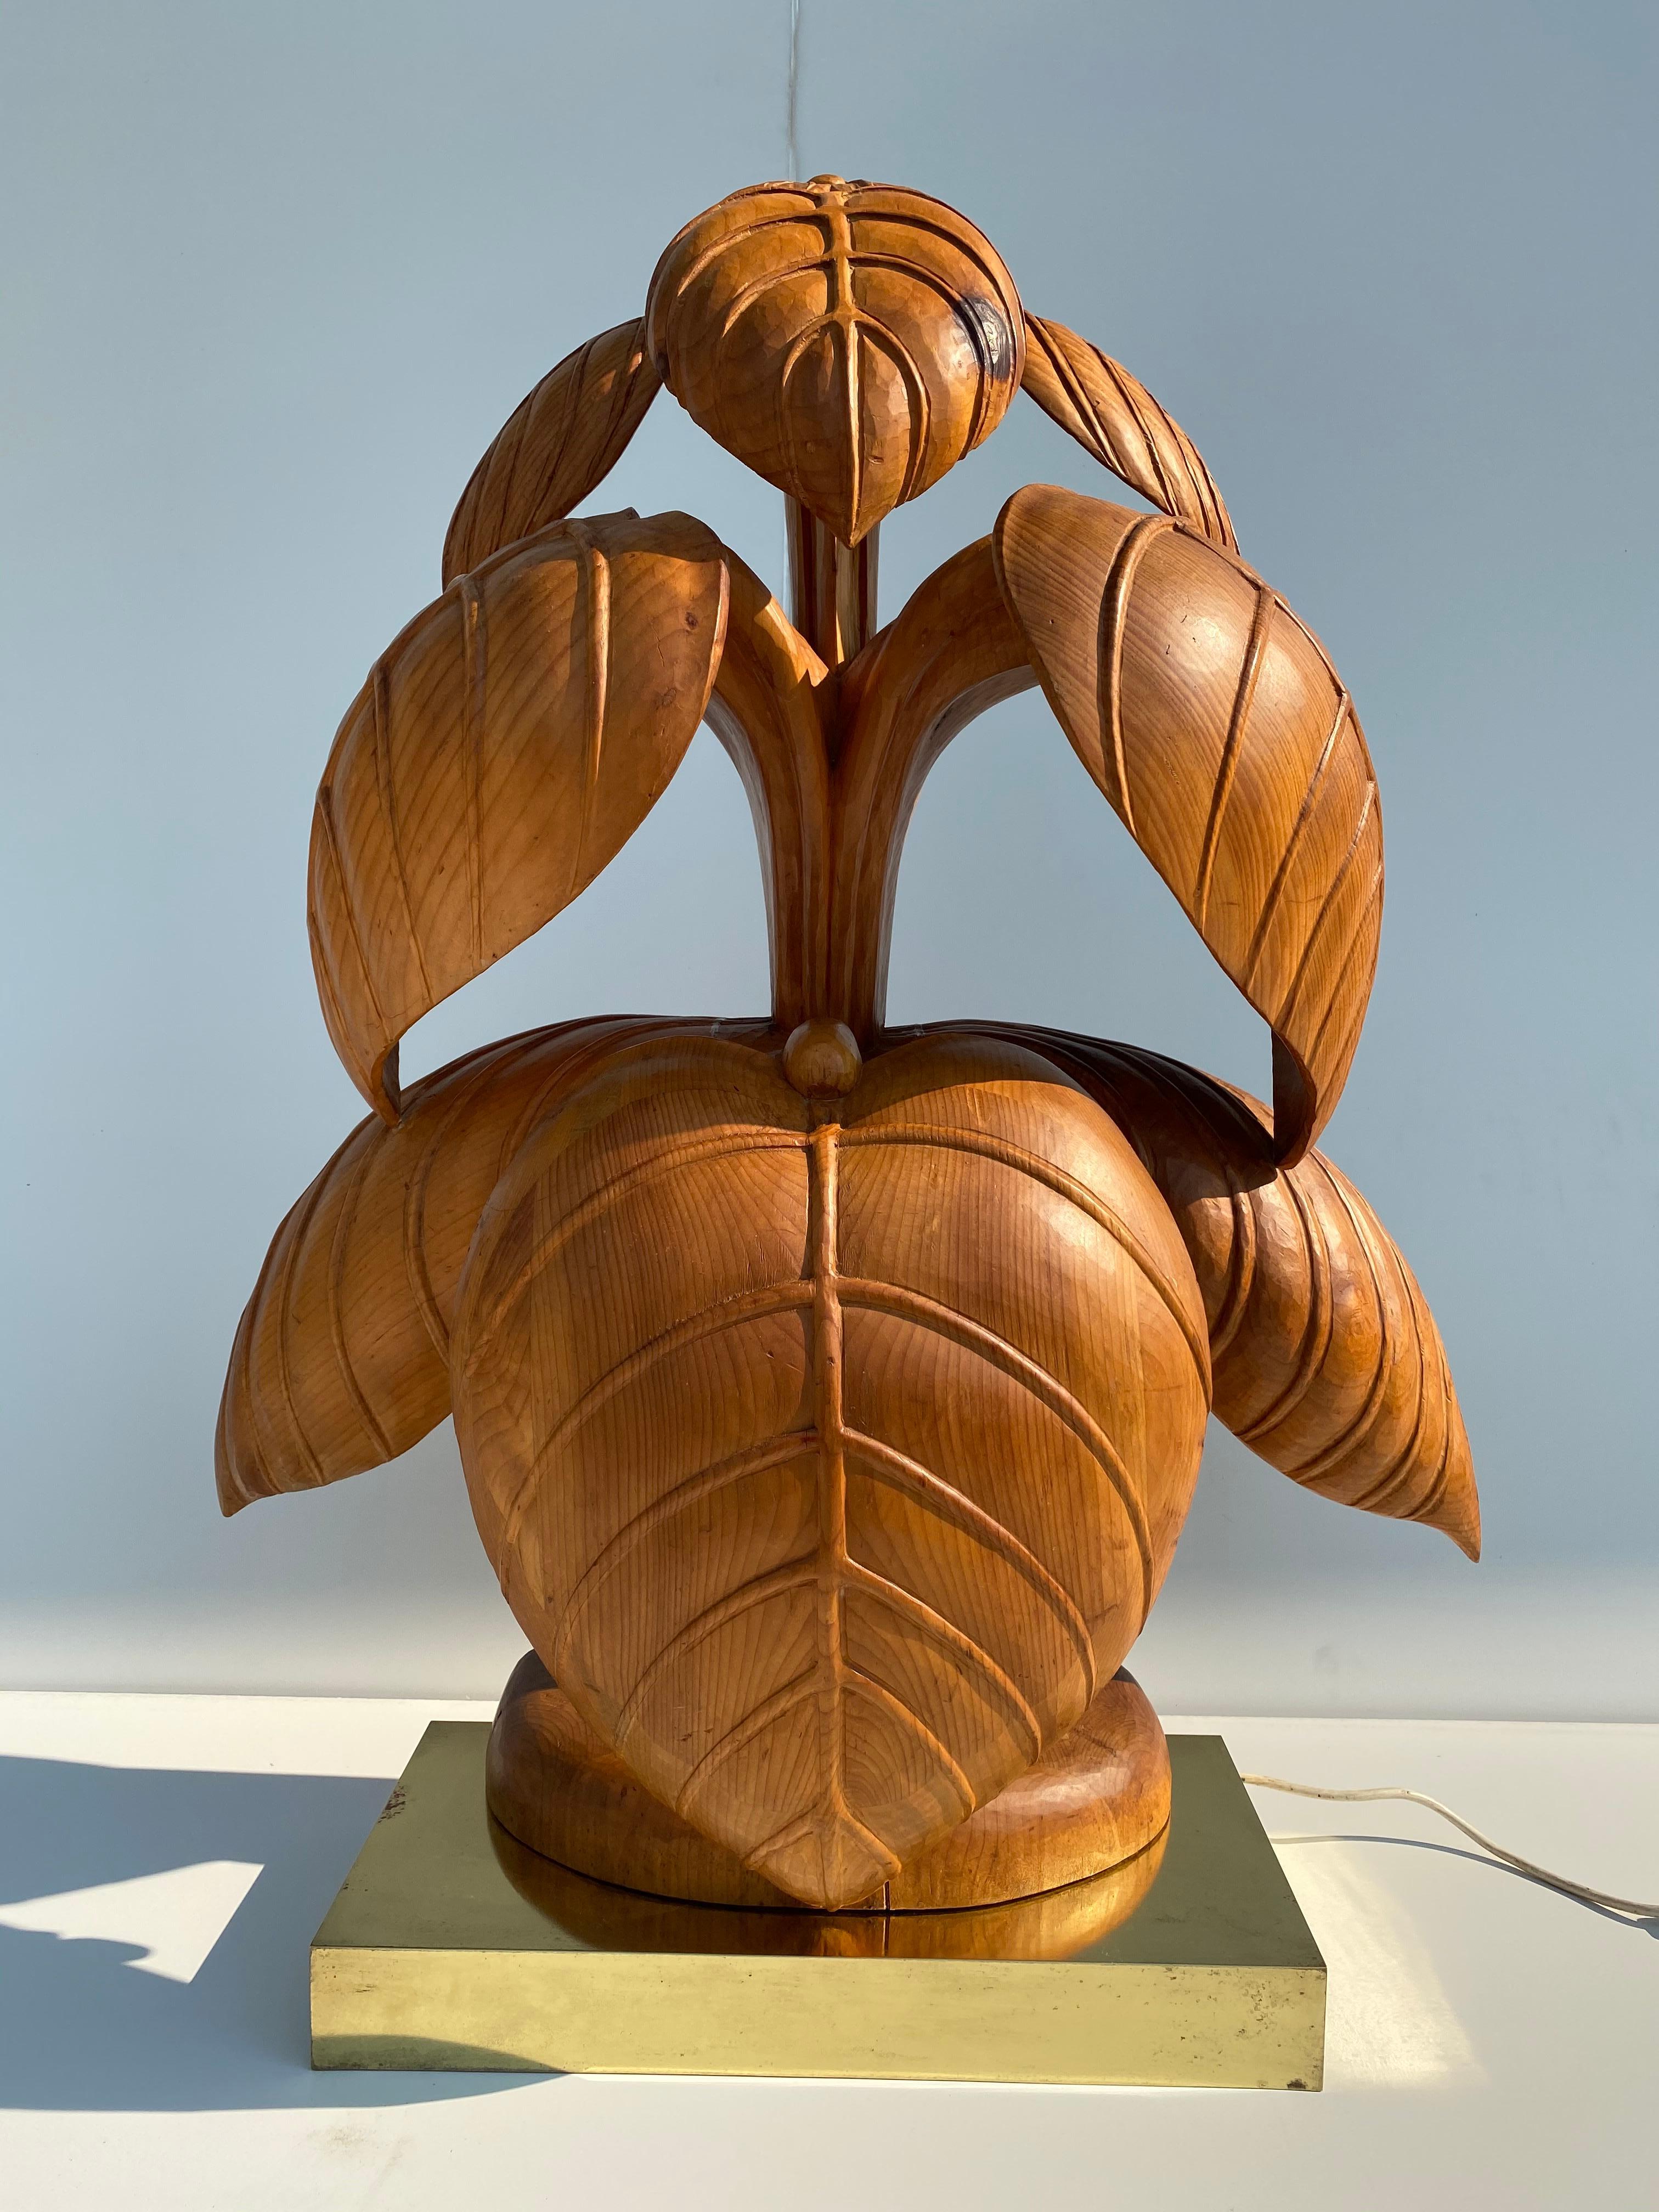 Rhubarb leaf sculpture / lamp by Bartolozzi & Maioli. It is hand carved out of knotty pine on brass base.